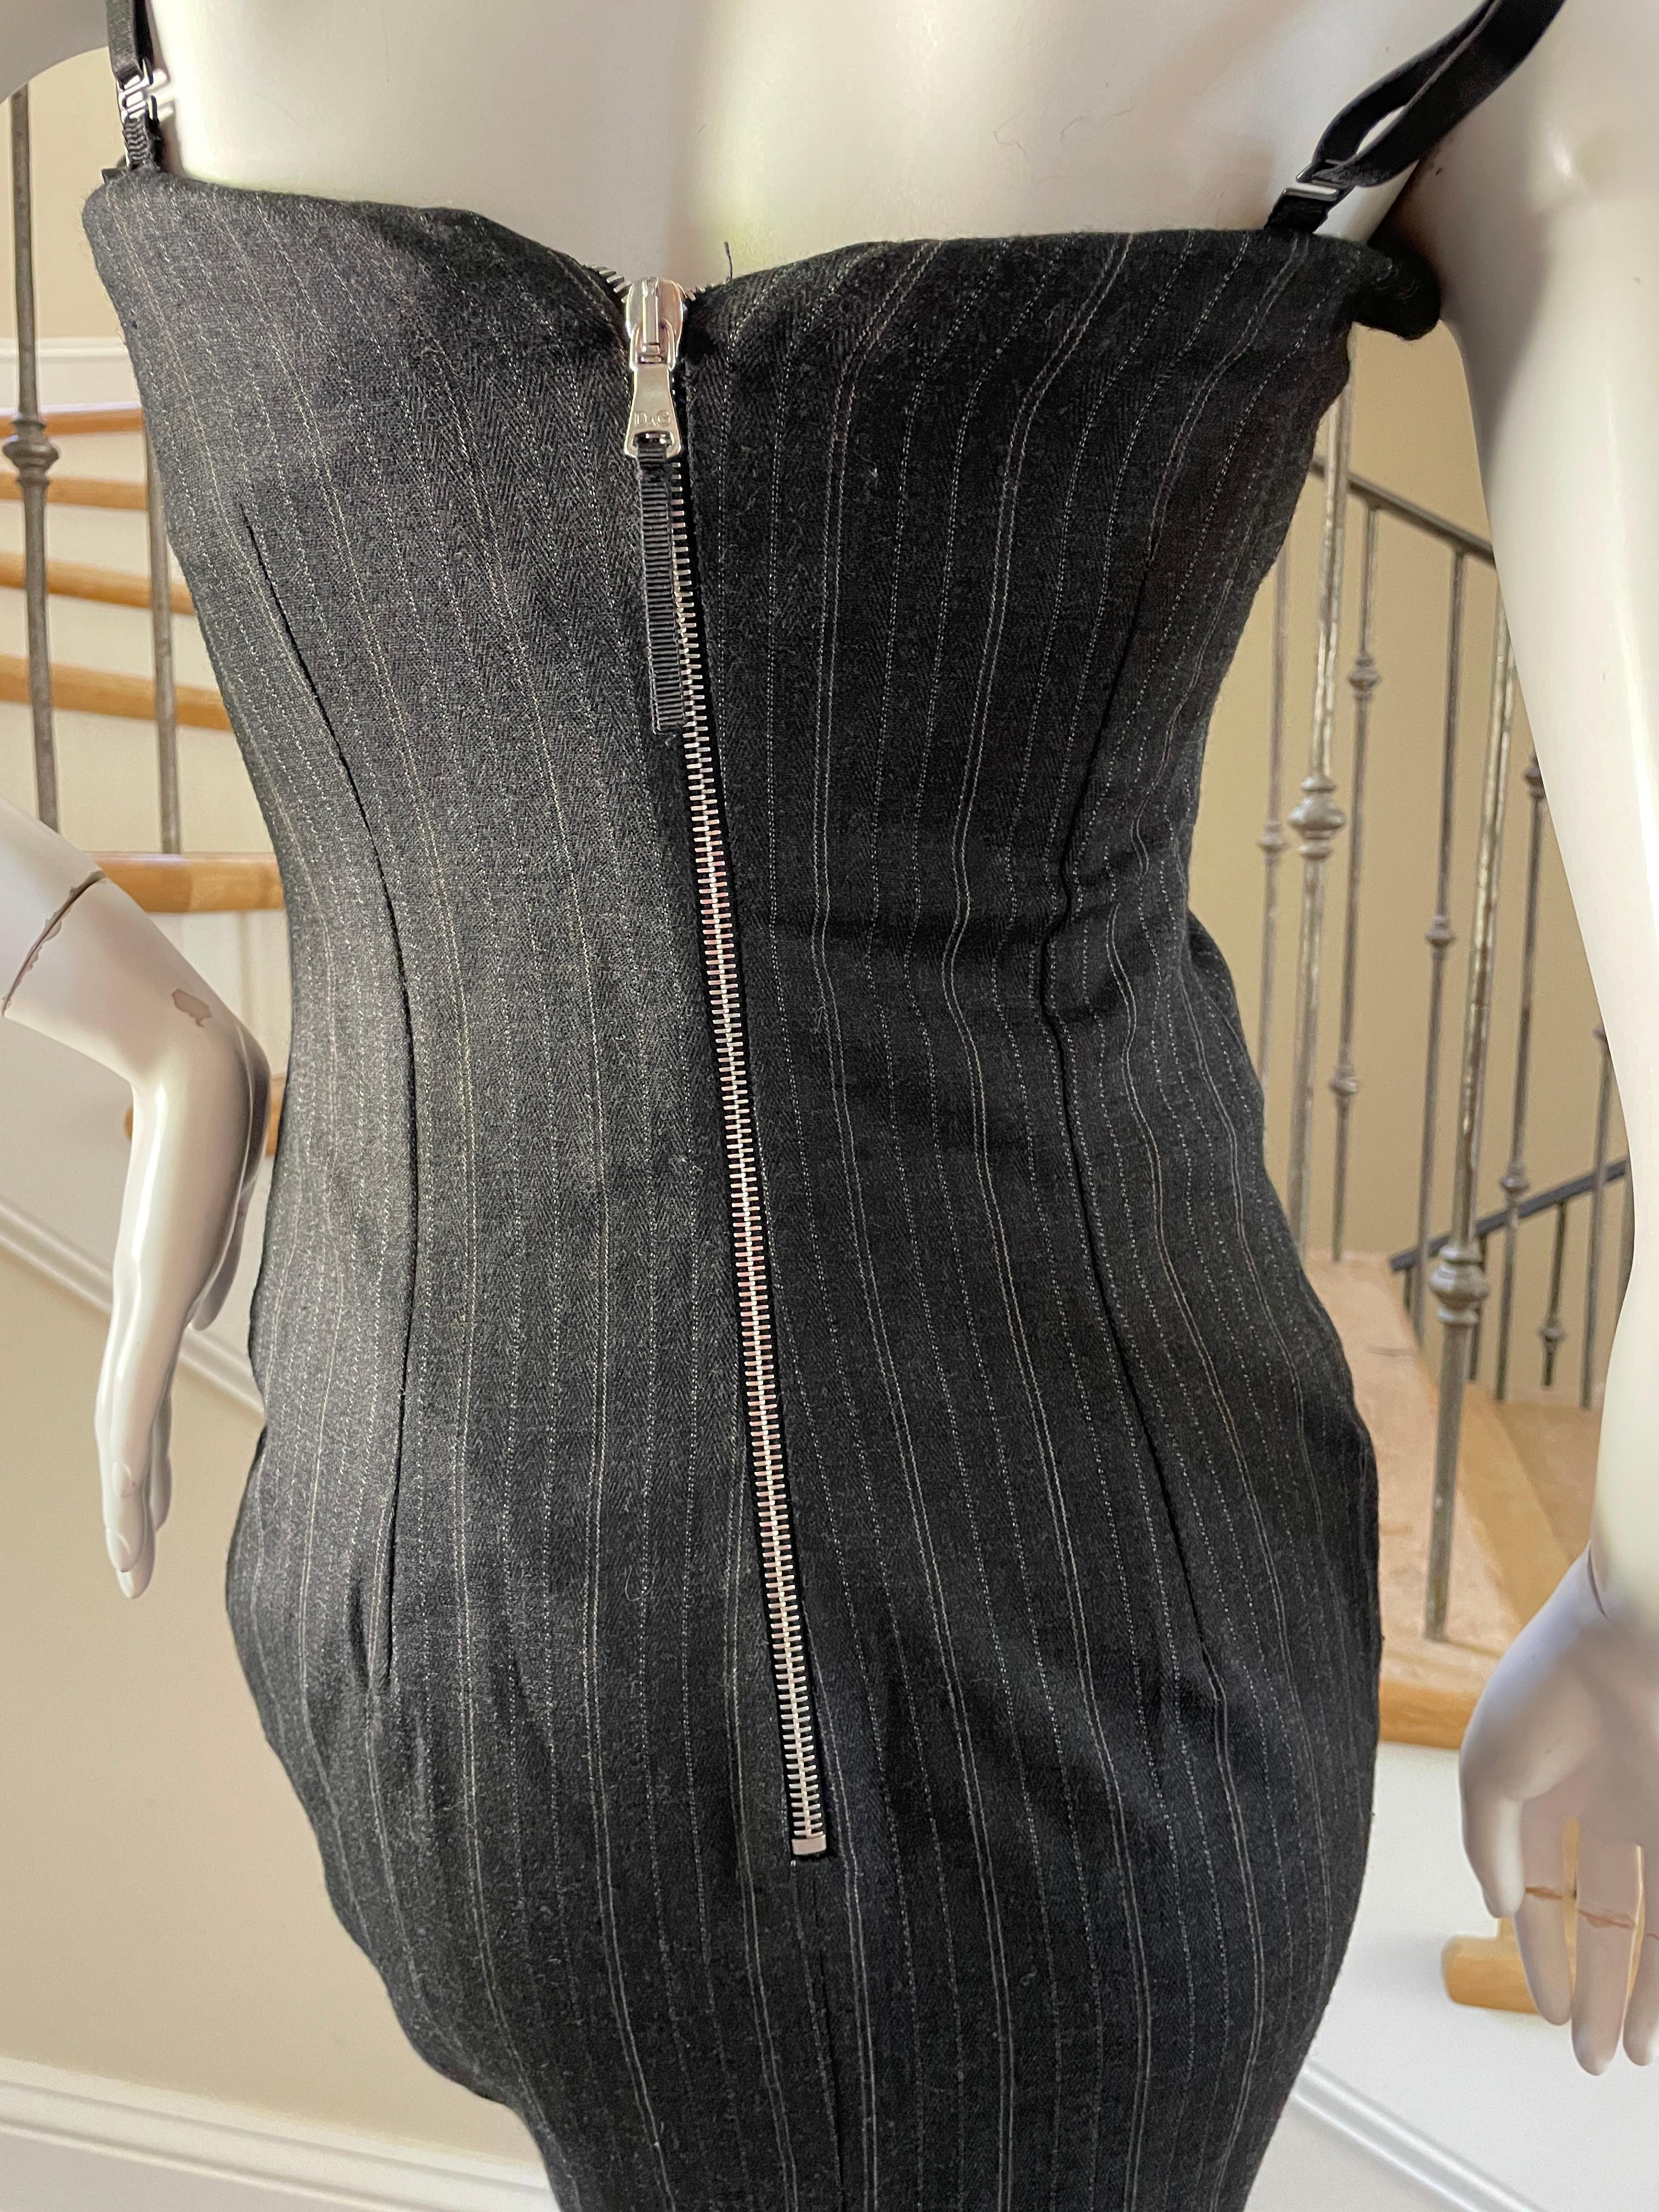 Dolce & Gabbana for D&G Pinstripe Cocktail Dress with Full Inner Corset. For Sale 4